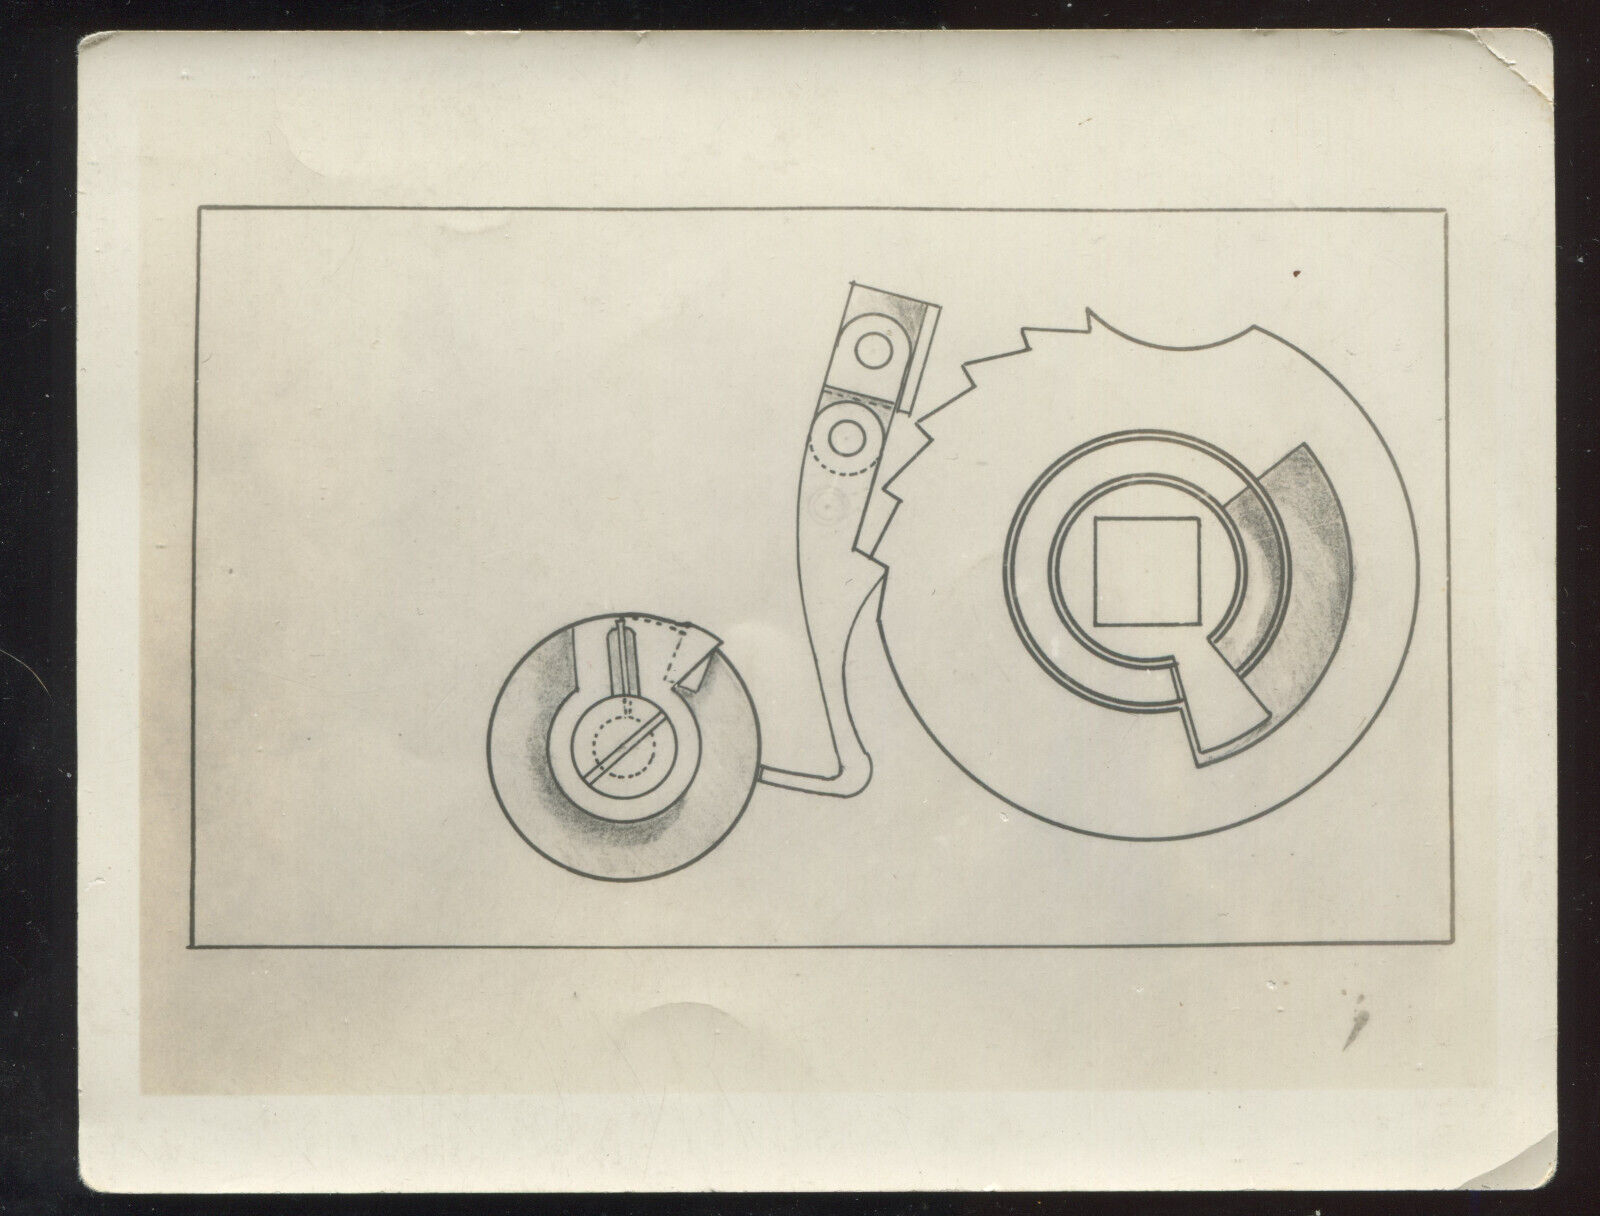 FOUND PHOTO Diagram Drawing of Mysterious Mechanism Odd Unusual Snapshot VTG